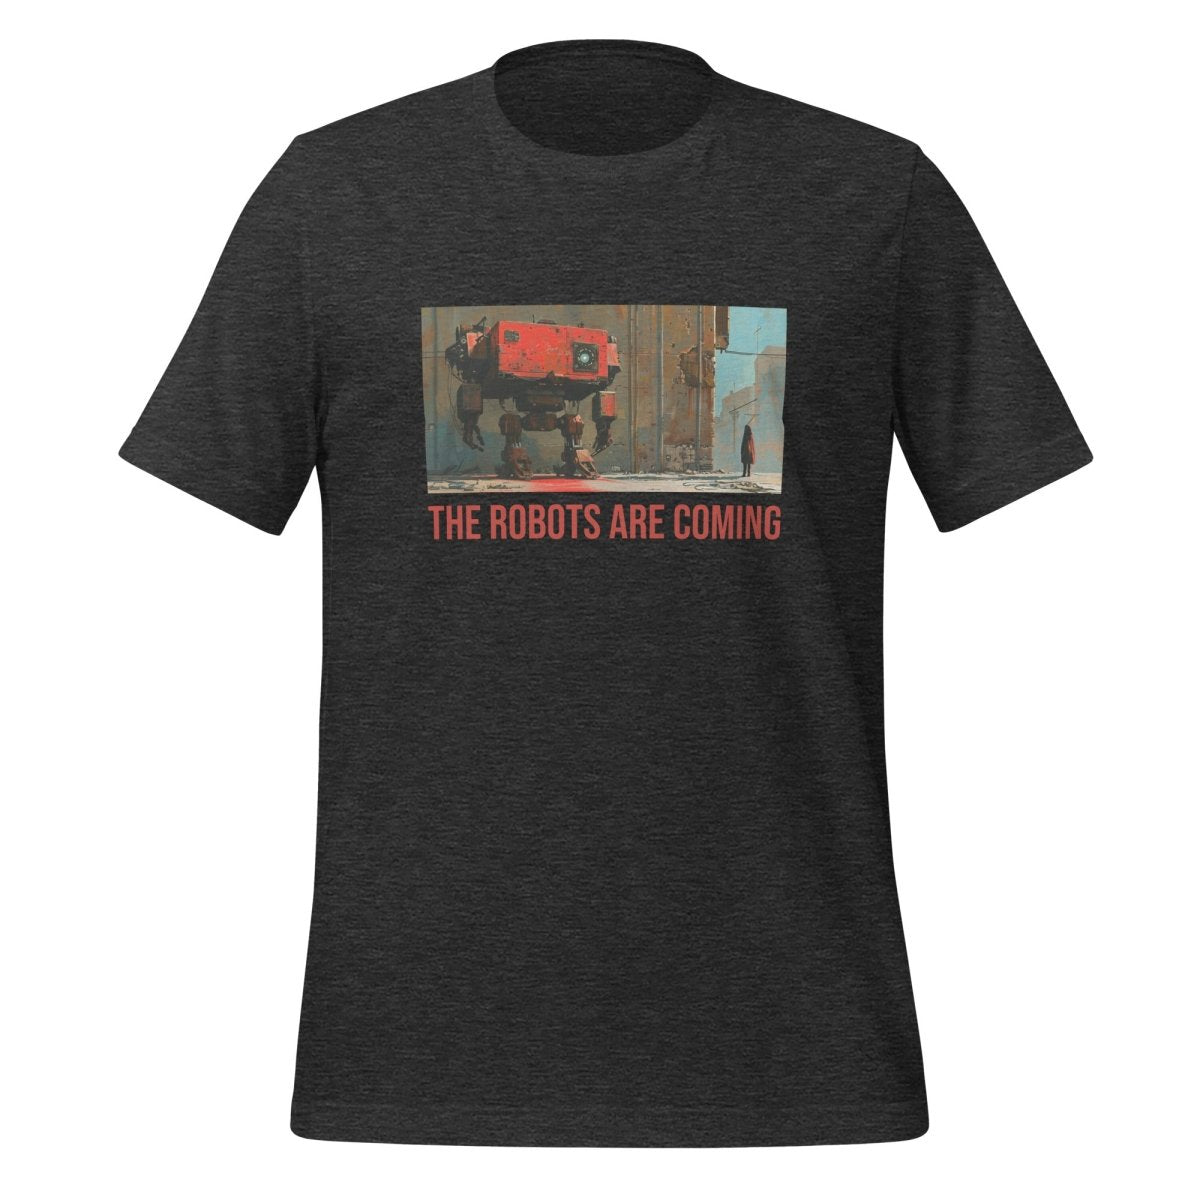 Illustrated The Robots Are Coming T - Shirt (unisex) - Dark Grey Heather - AI Store